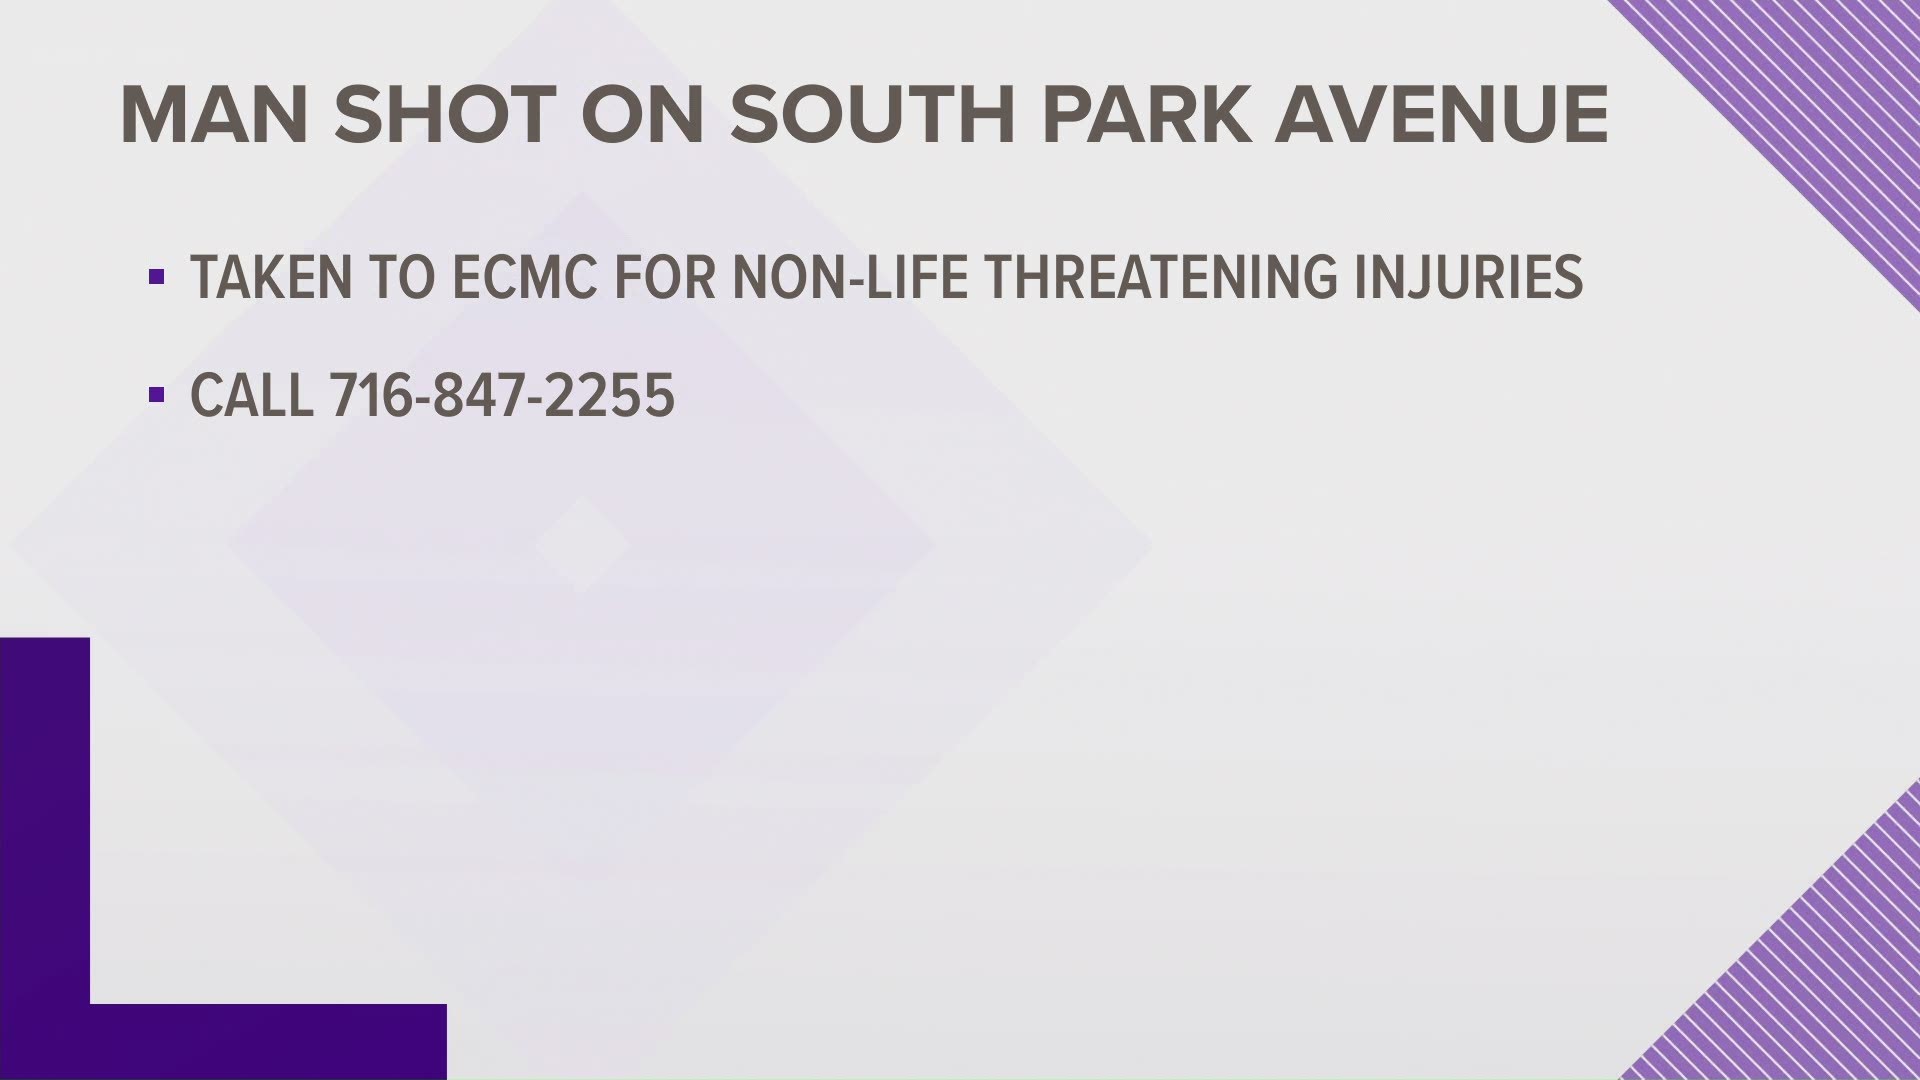 A man was shot last night on South Park Avenue after a dispute with an individual. He was taken to ECMC with non-life threatening injuries.